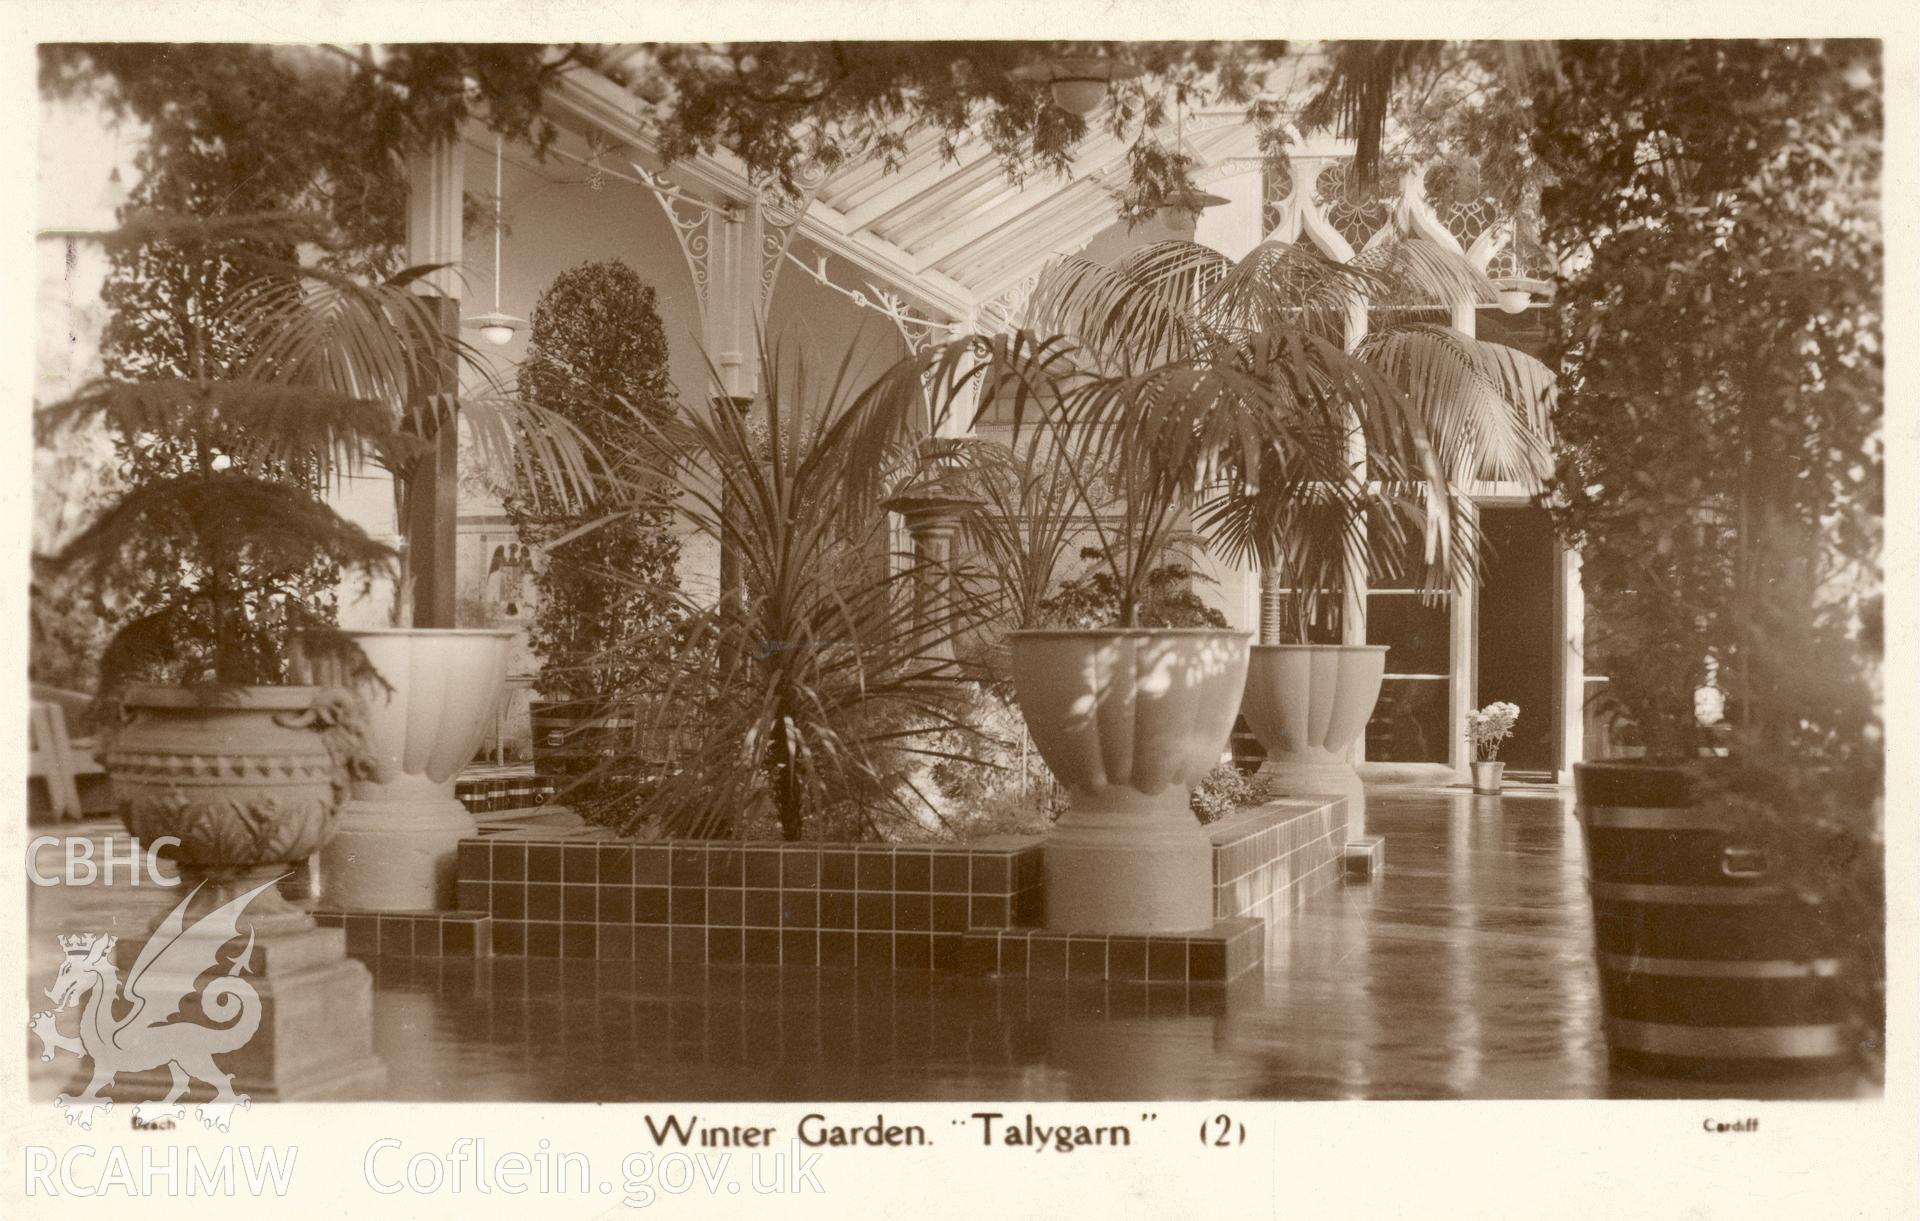 Digitised postcard image of interior of Winter Gardens, Talygarn, Pont-y-Clun, H.T. Beach, The Studio, 238 Whitchurch Road, Cardiff. Produced by Parks and Gardens Data Services, from an original item in the Peter Davis Collection at Parks and Gardens UK. We hold only web-resolution images of this collection, suitable for viewing on screen and for research purposes only. We do not hold the original images, or publication quality scans.